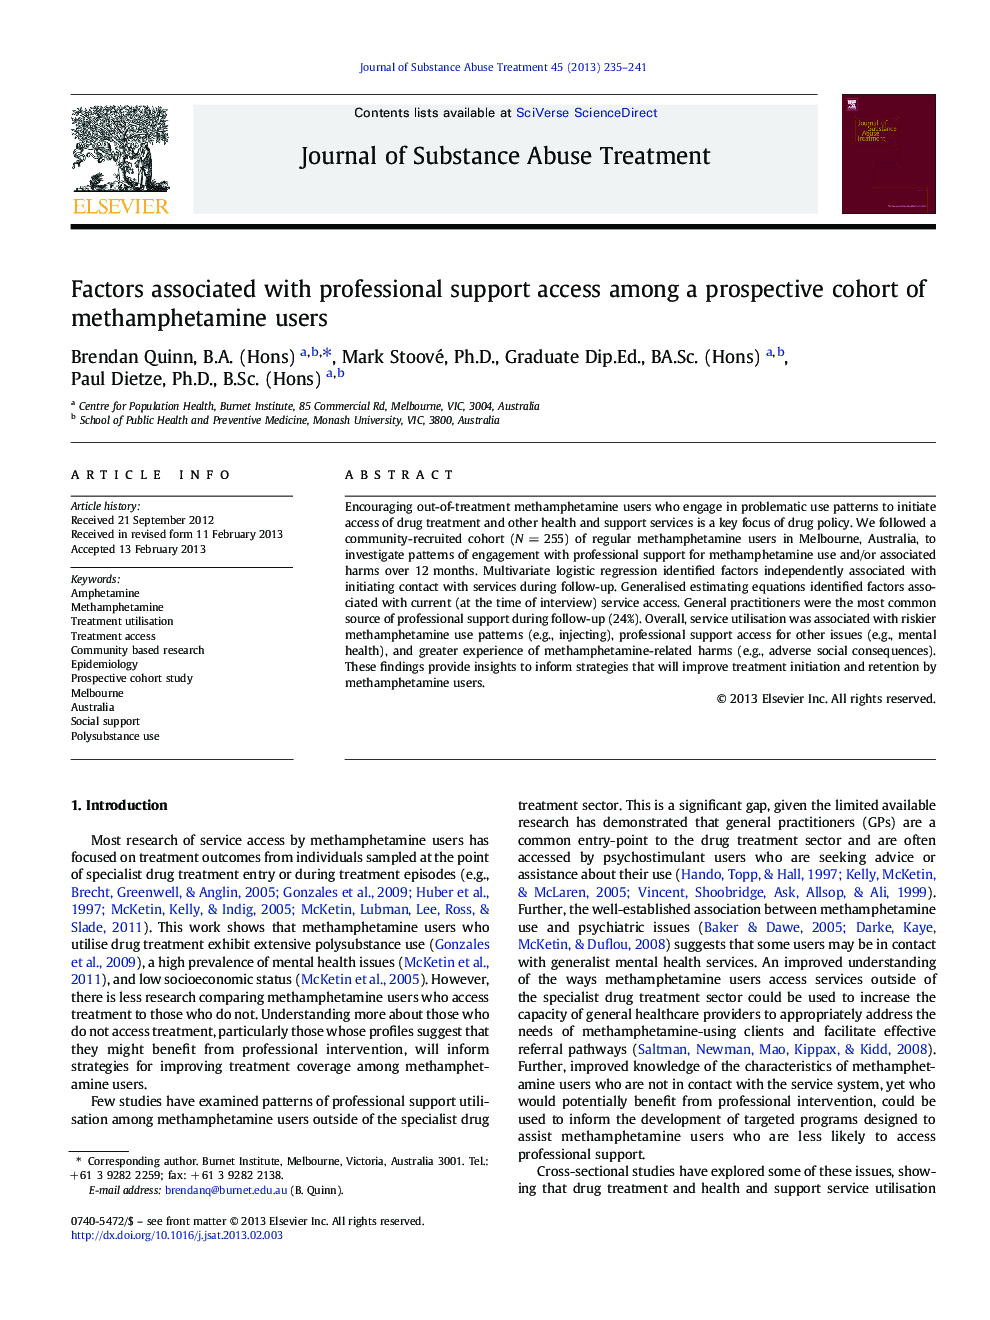 Factors associated with professional support access among a prospective cohort of methamphetamine users